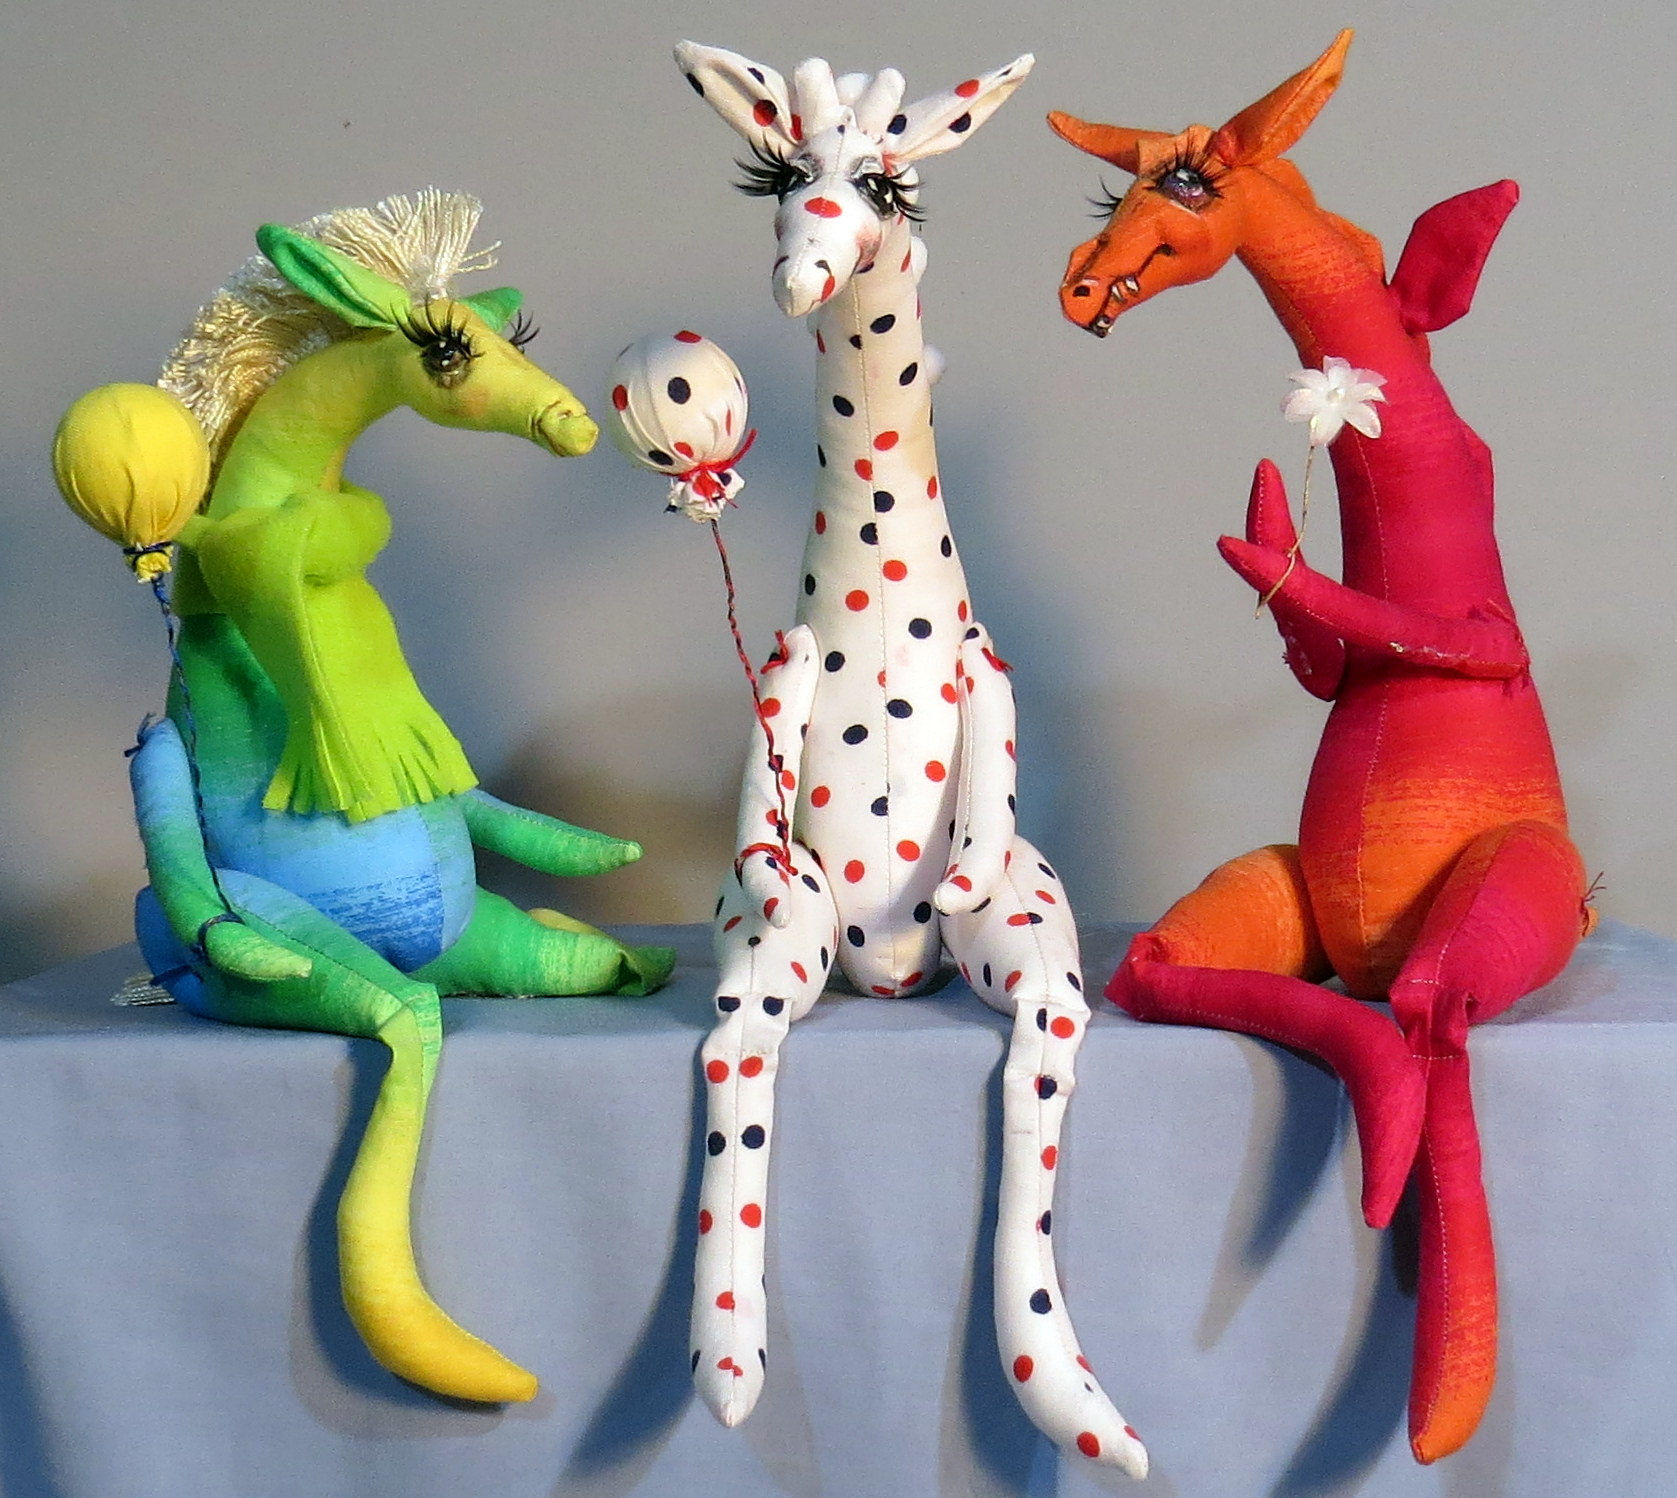 Giraffe Cloth Animal Doll Pattern plus a Free Project - Sew a Adult and  Baby Giraffe Today!